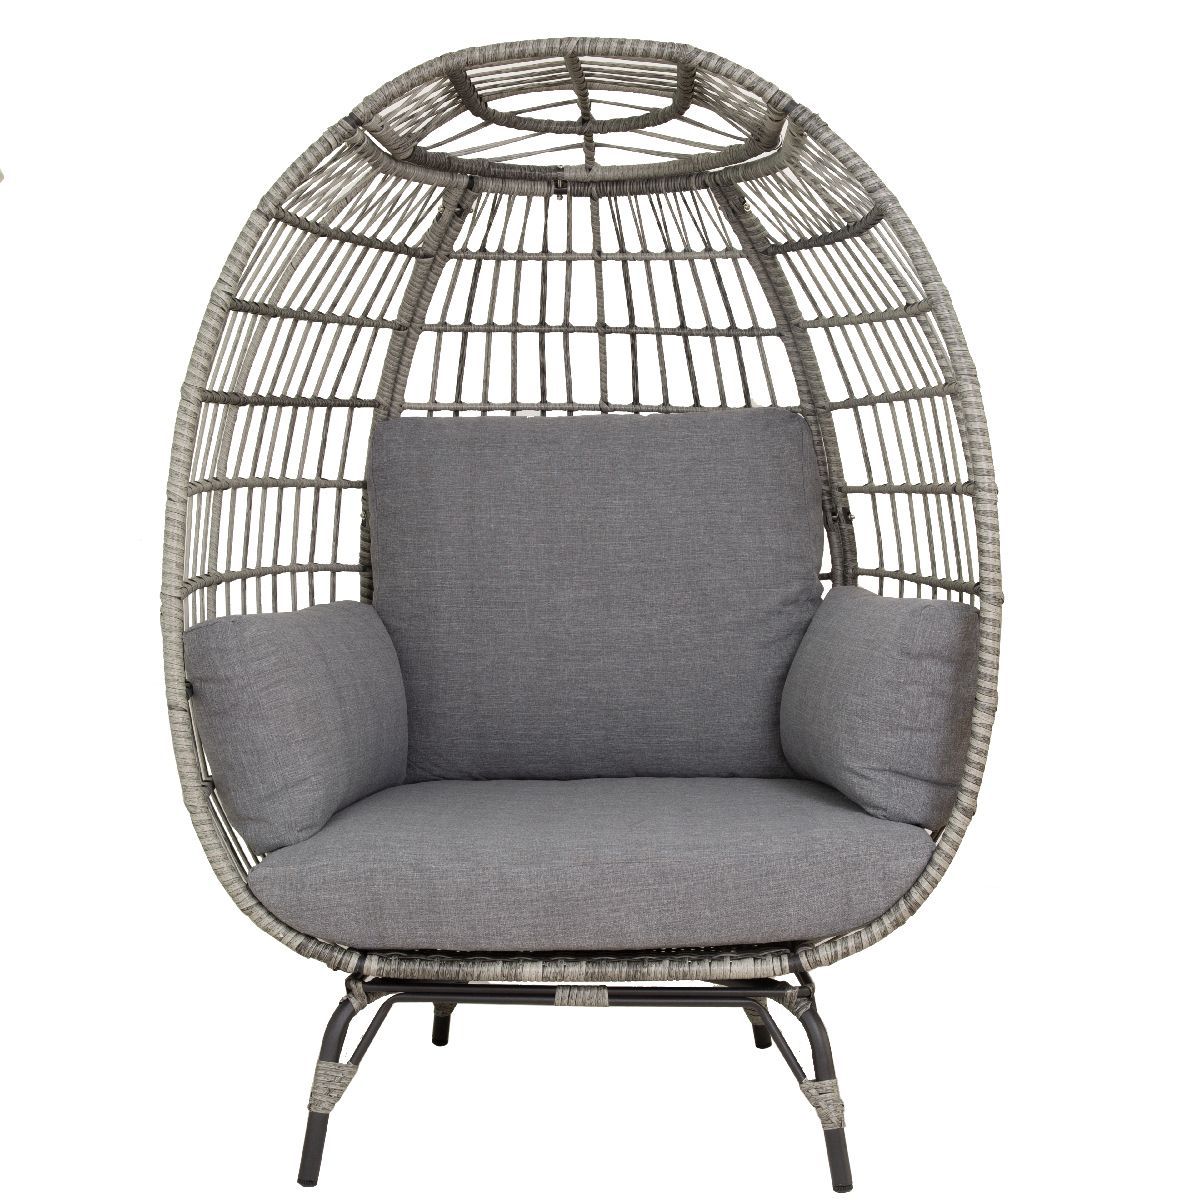 Barton Oversized Wicker Egg Chair Indoor/Outdoor Patio Lounger Seat Cushion Included, Grey | Target